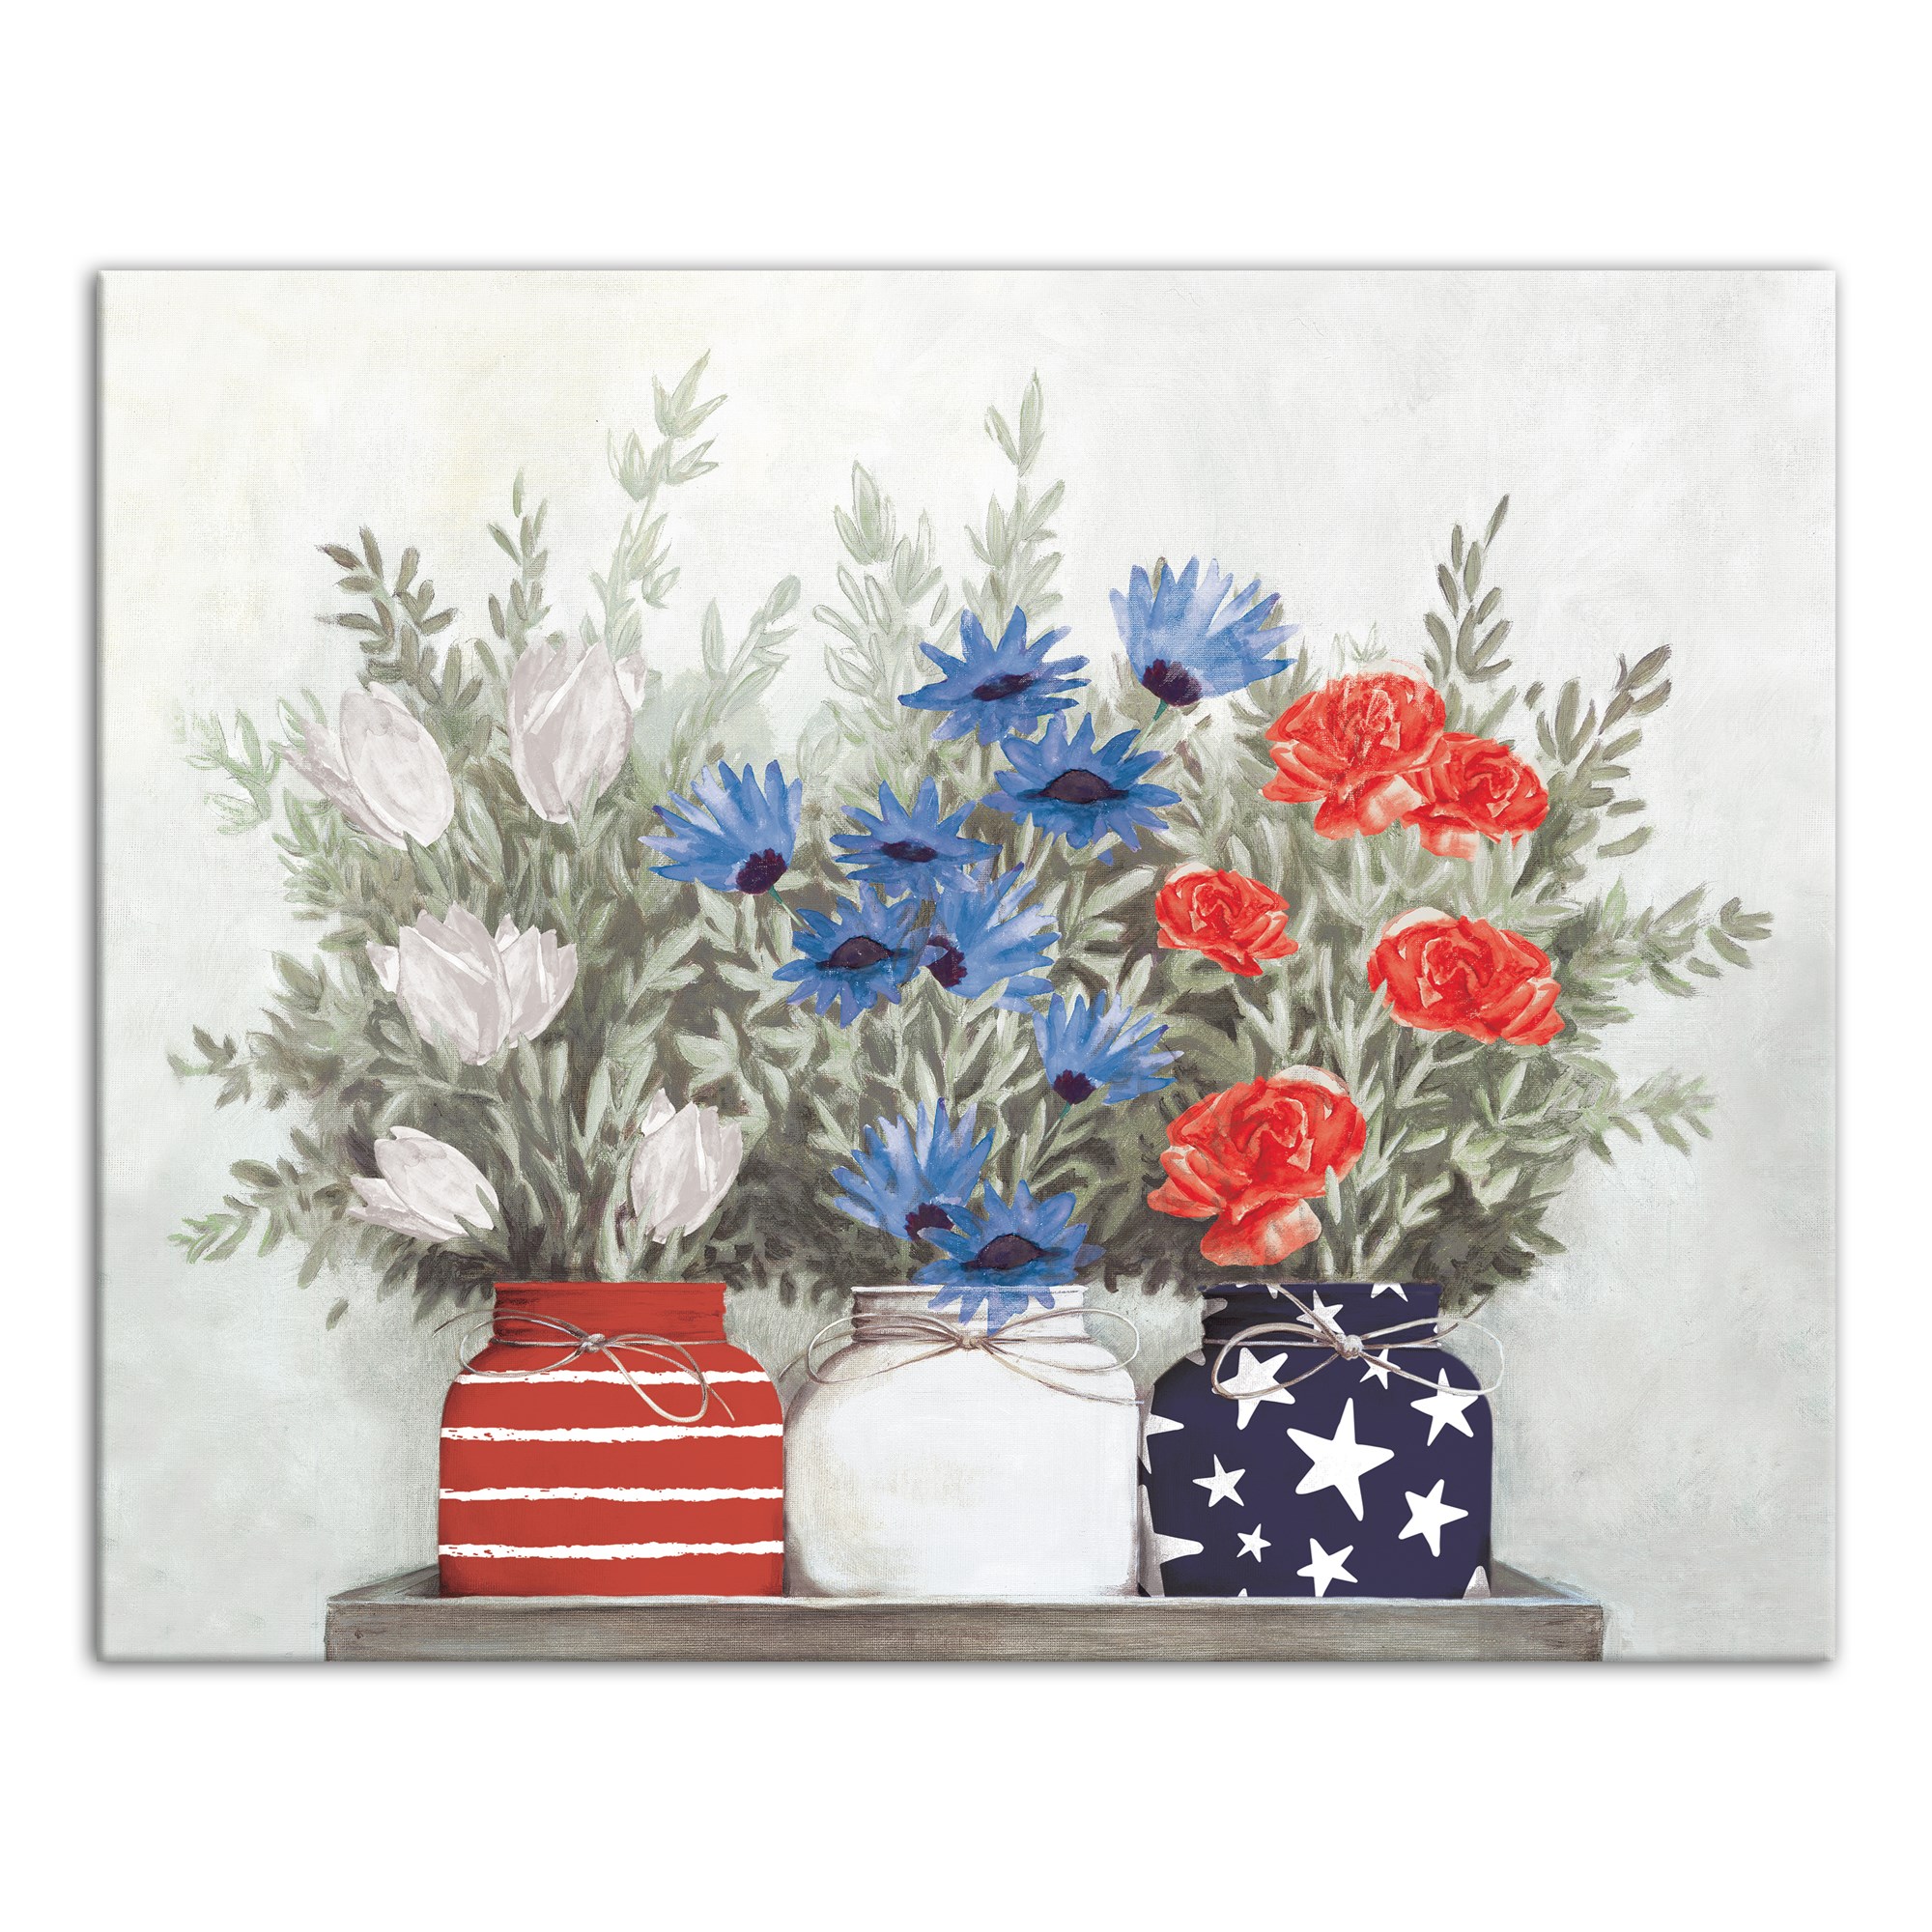 Picture of Patriotic Flowers Mason Jar 16x20 Canvas Wall Art